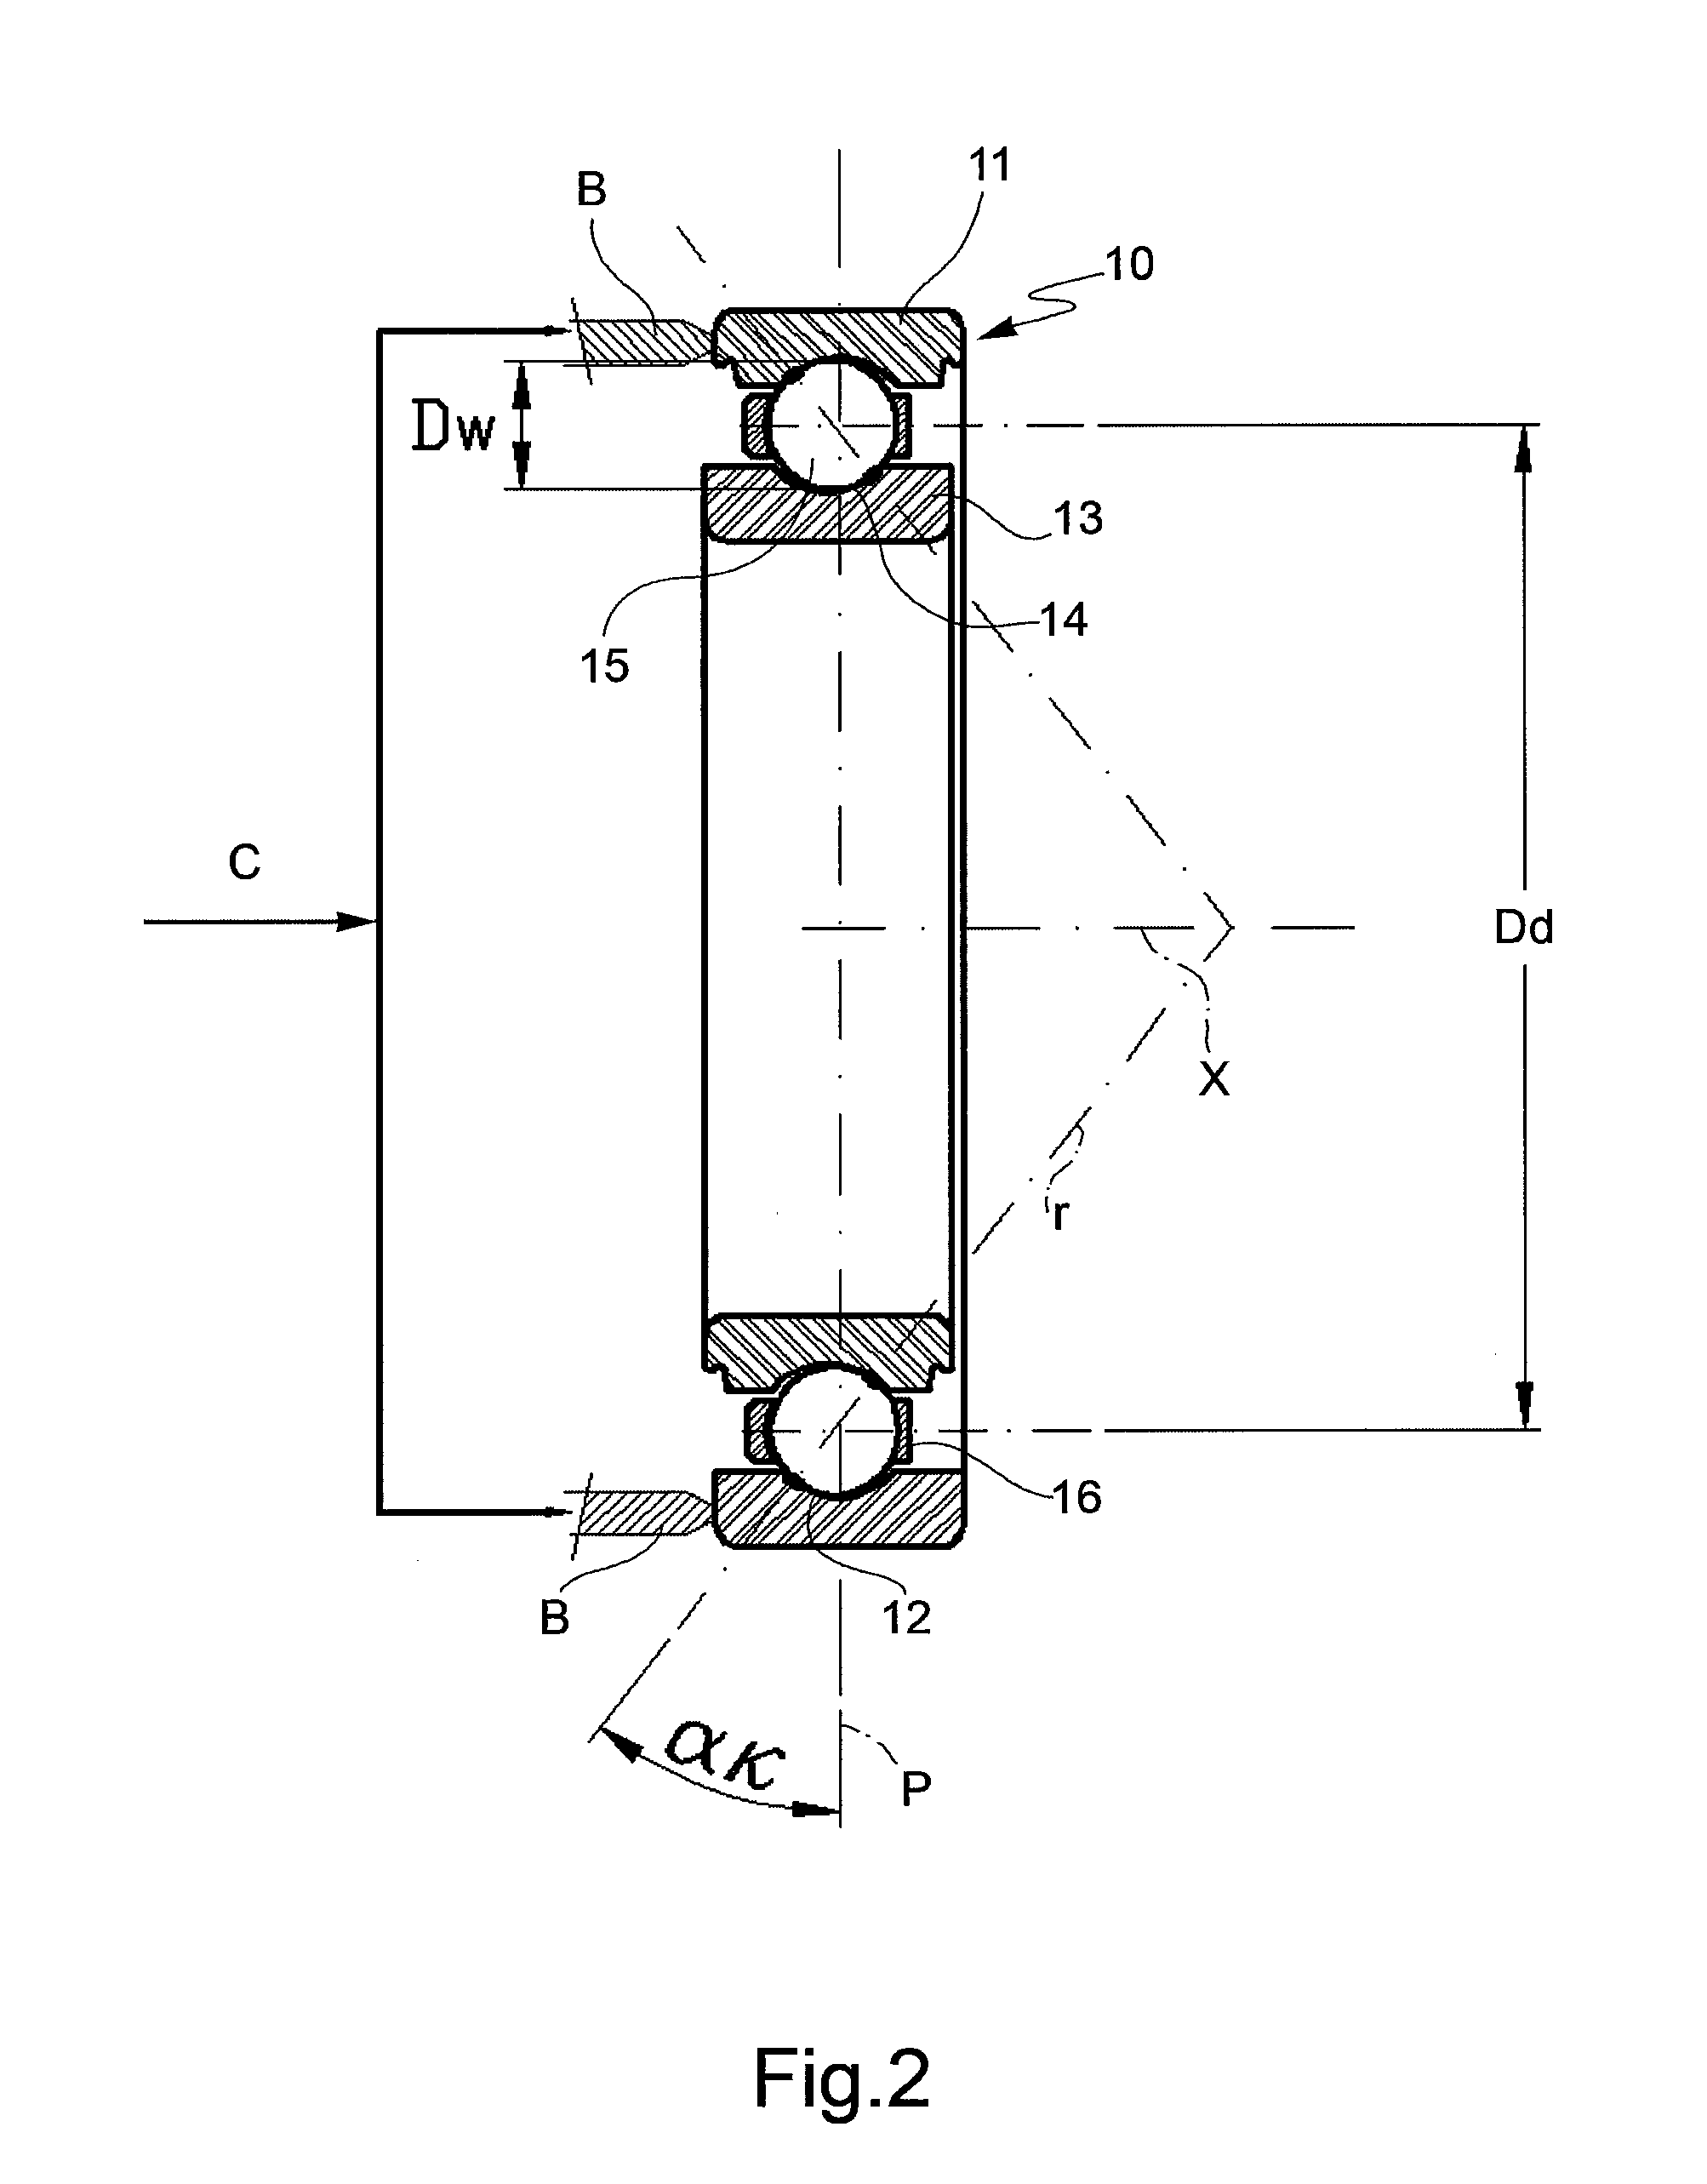 Method of Determining the Contact Angle of a Ball Bearing